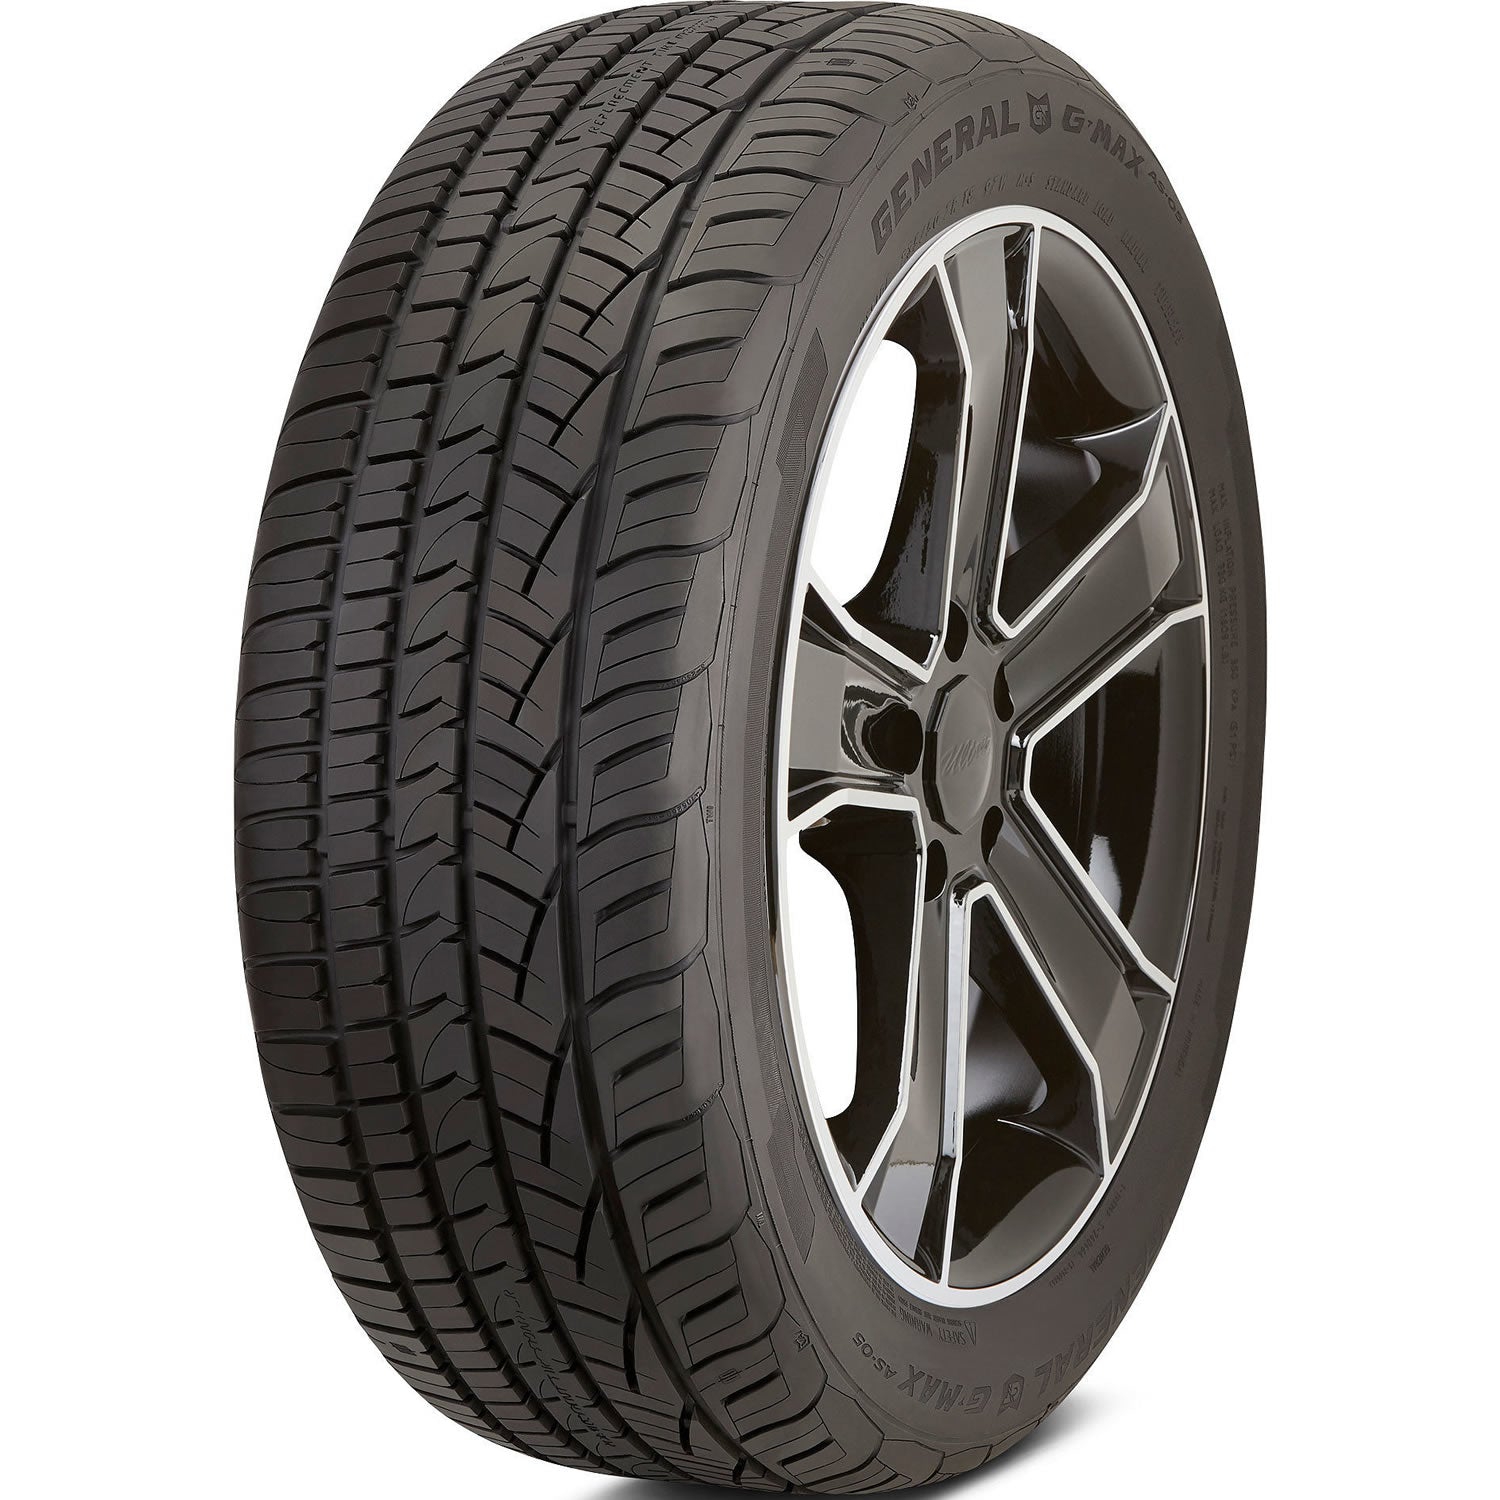 GENERAL G-MAX AS-05 255/35ZR18 (25X10R 18) Tires